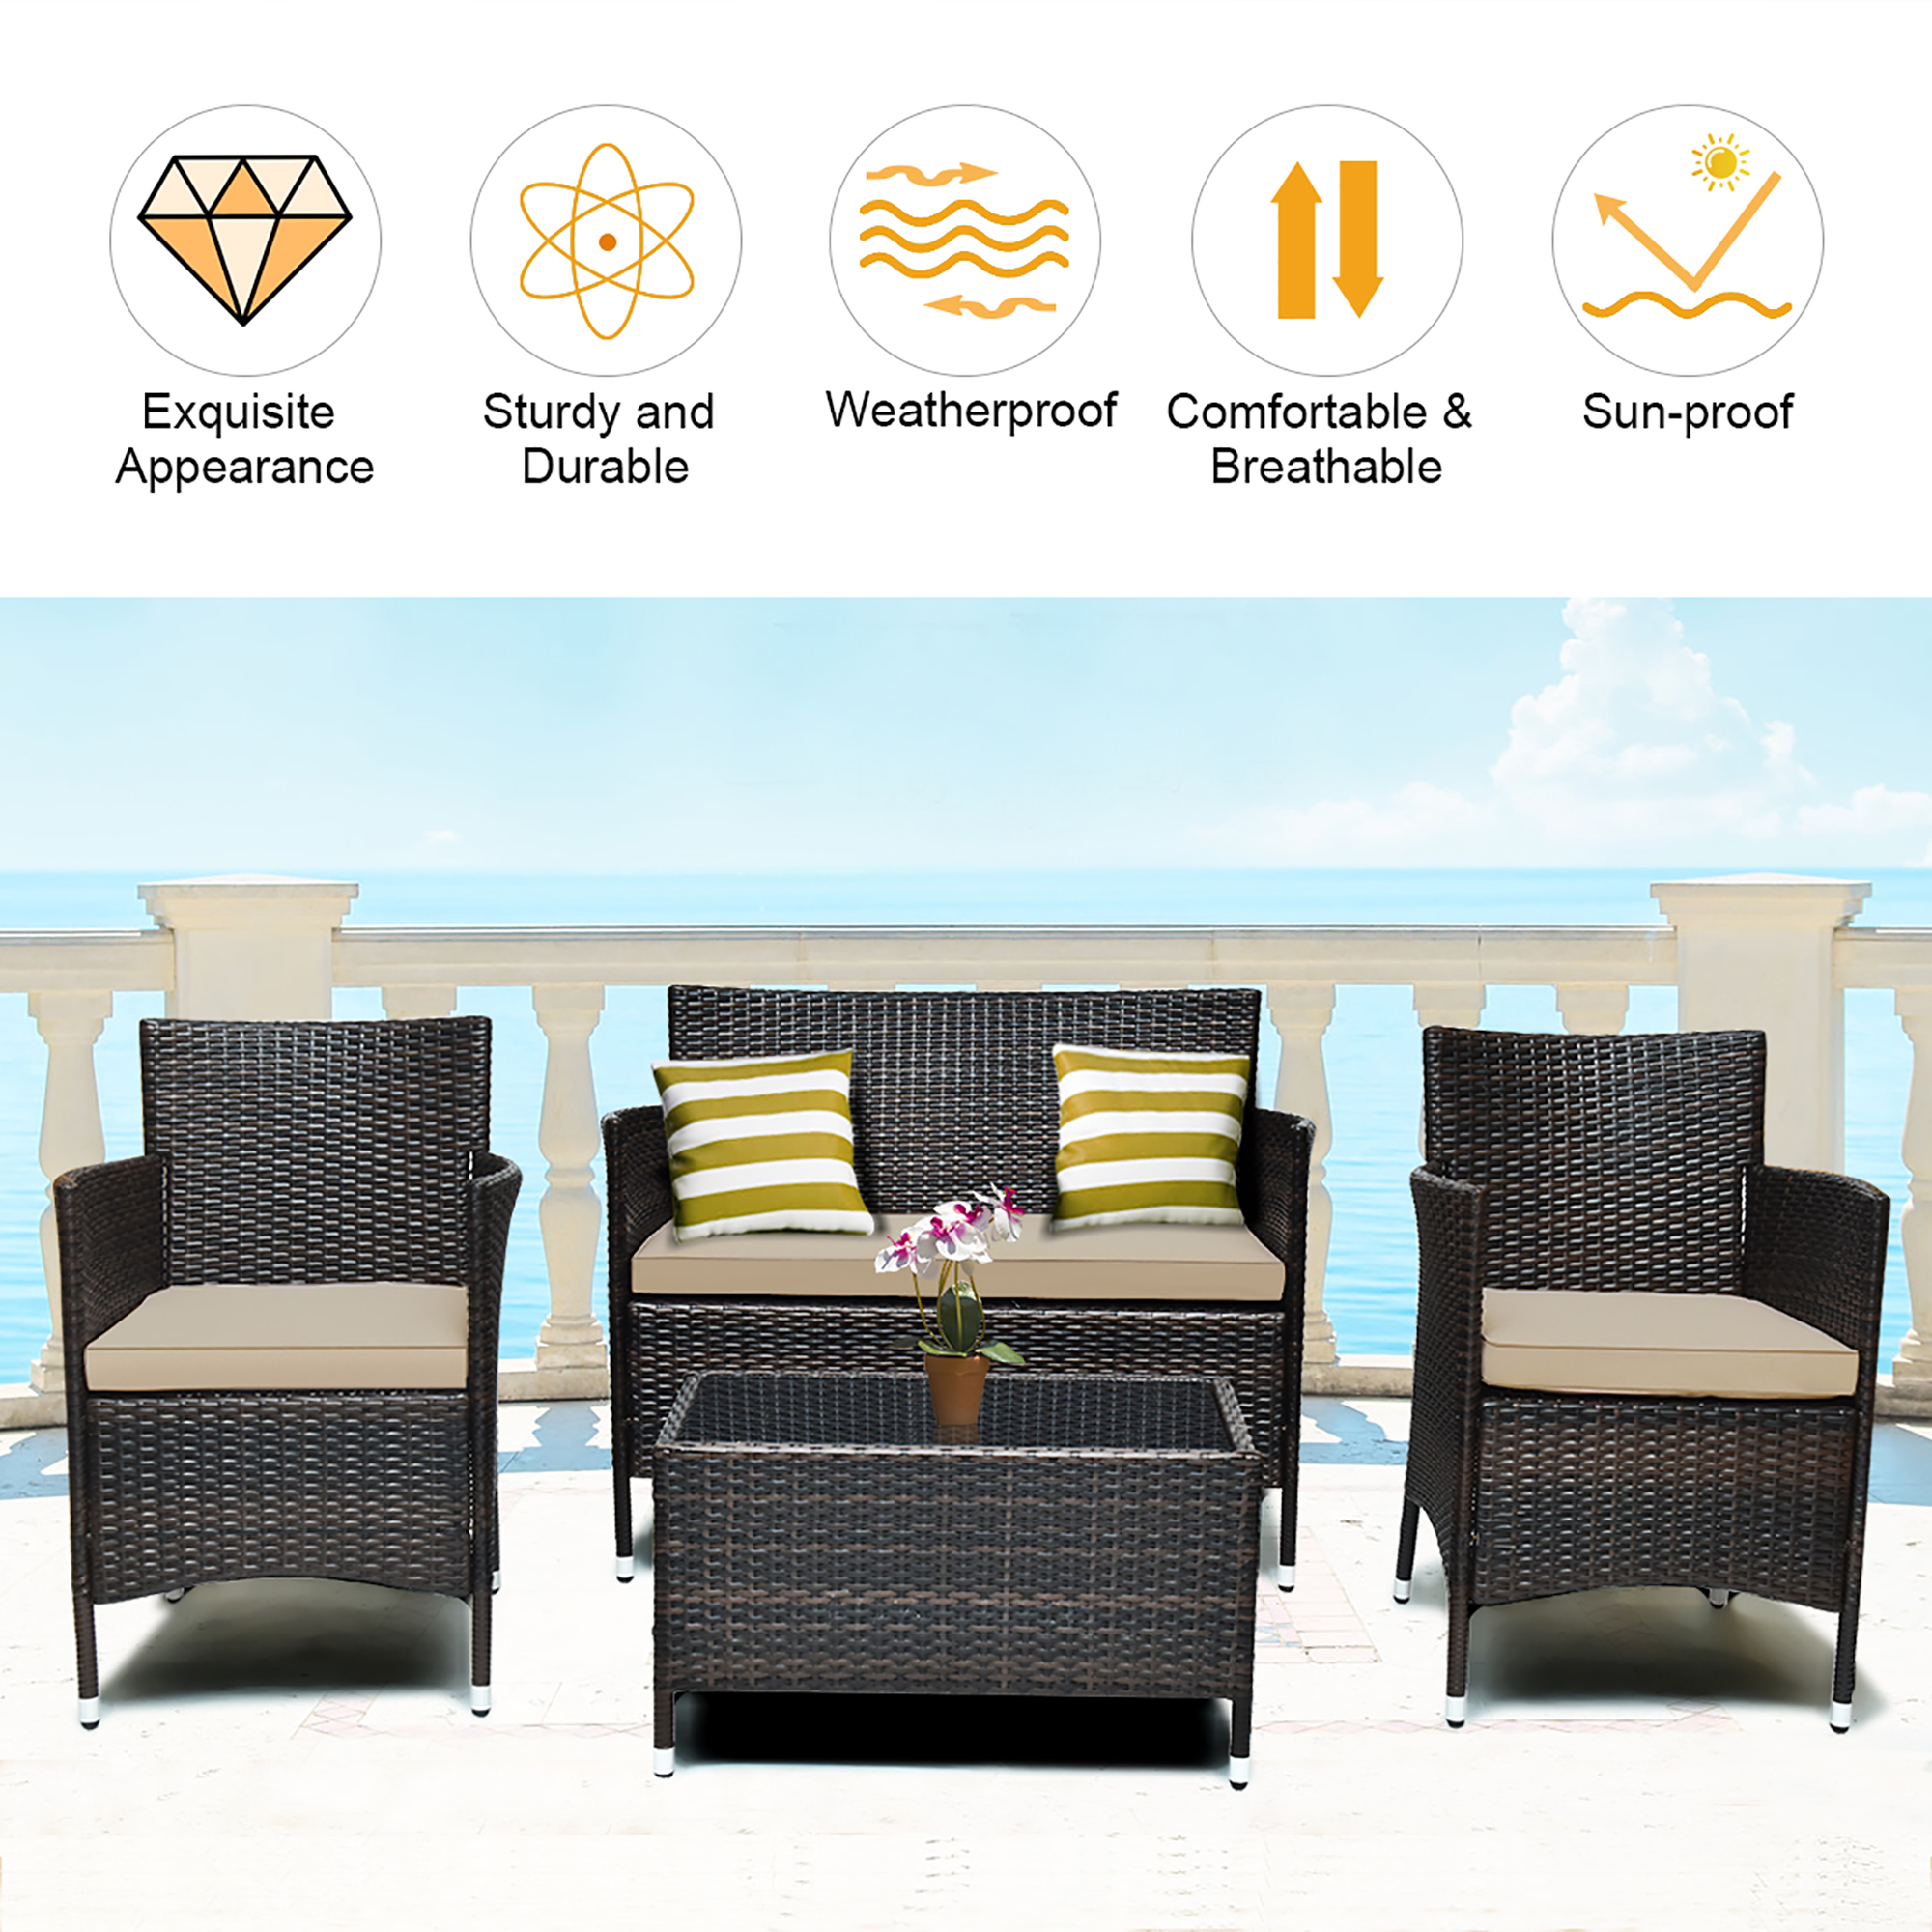 Costway 8PCS Patio Furniture Set Cushioned Sofa Coffee Table - image 5 of 9